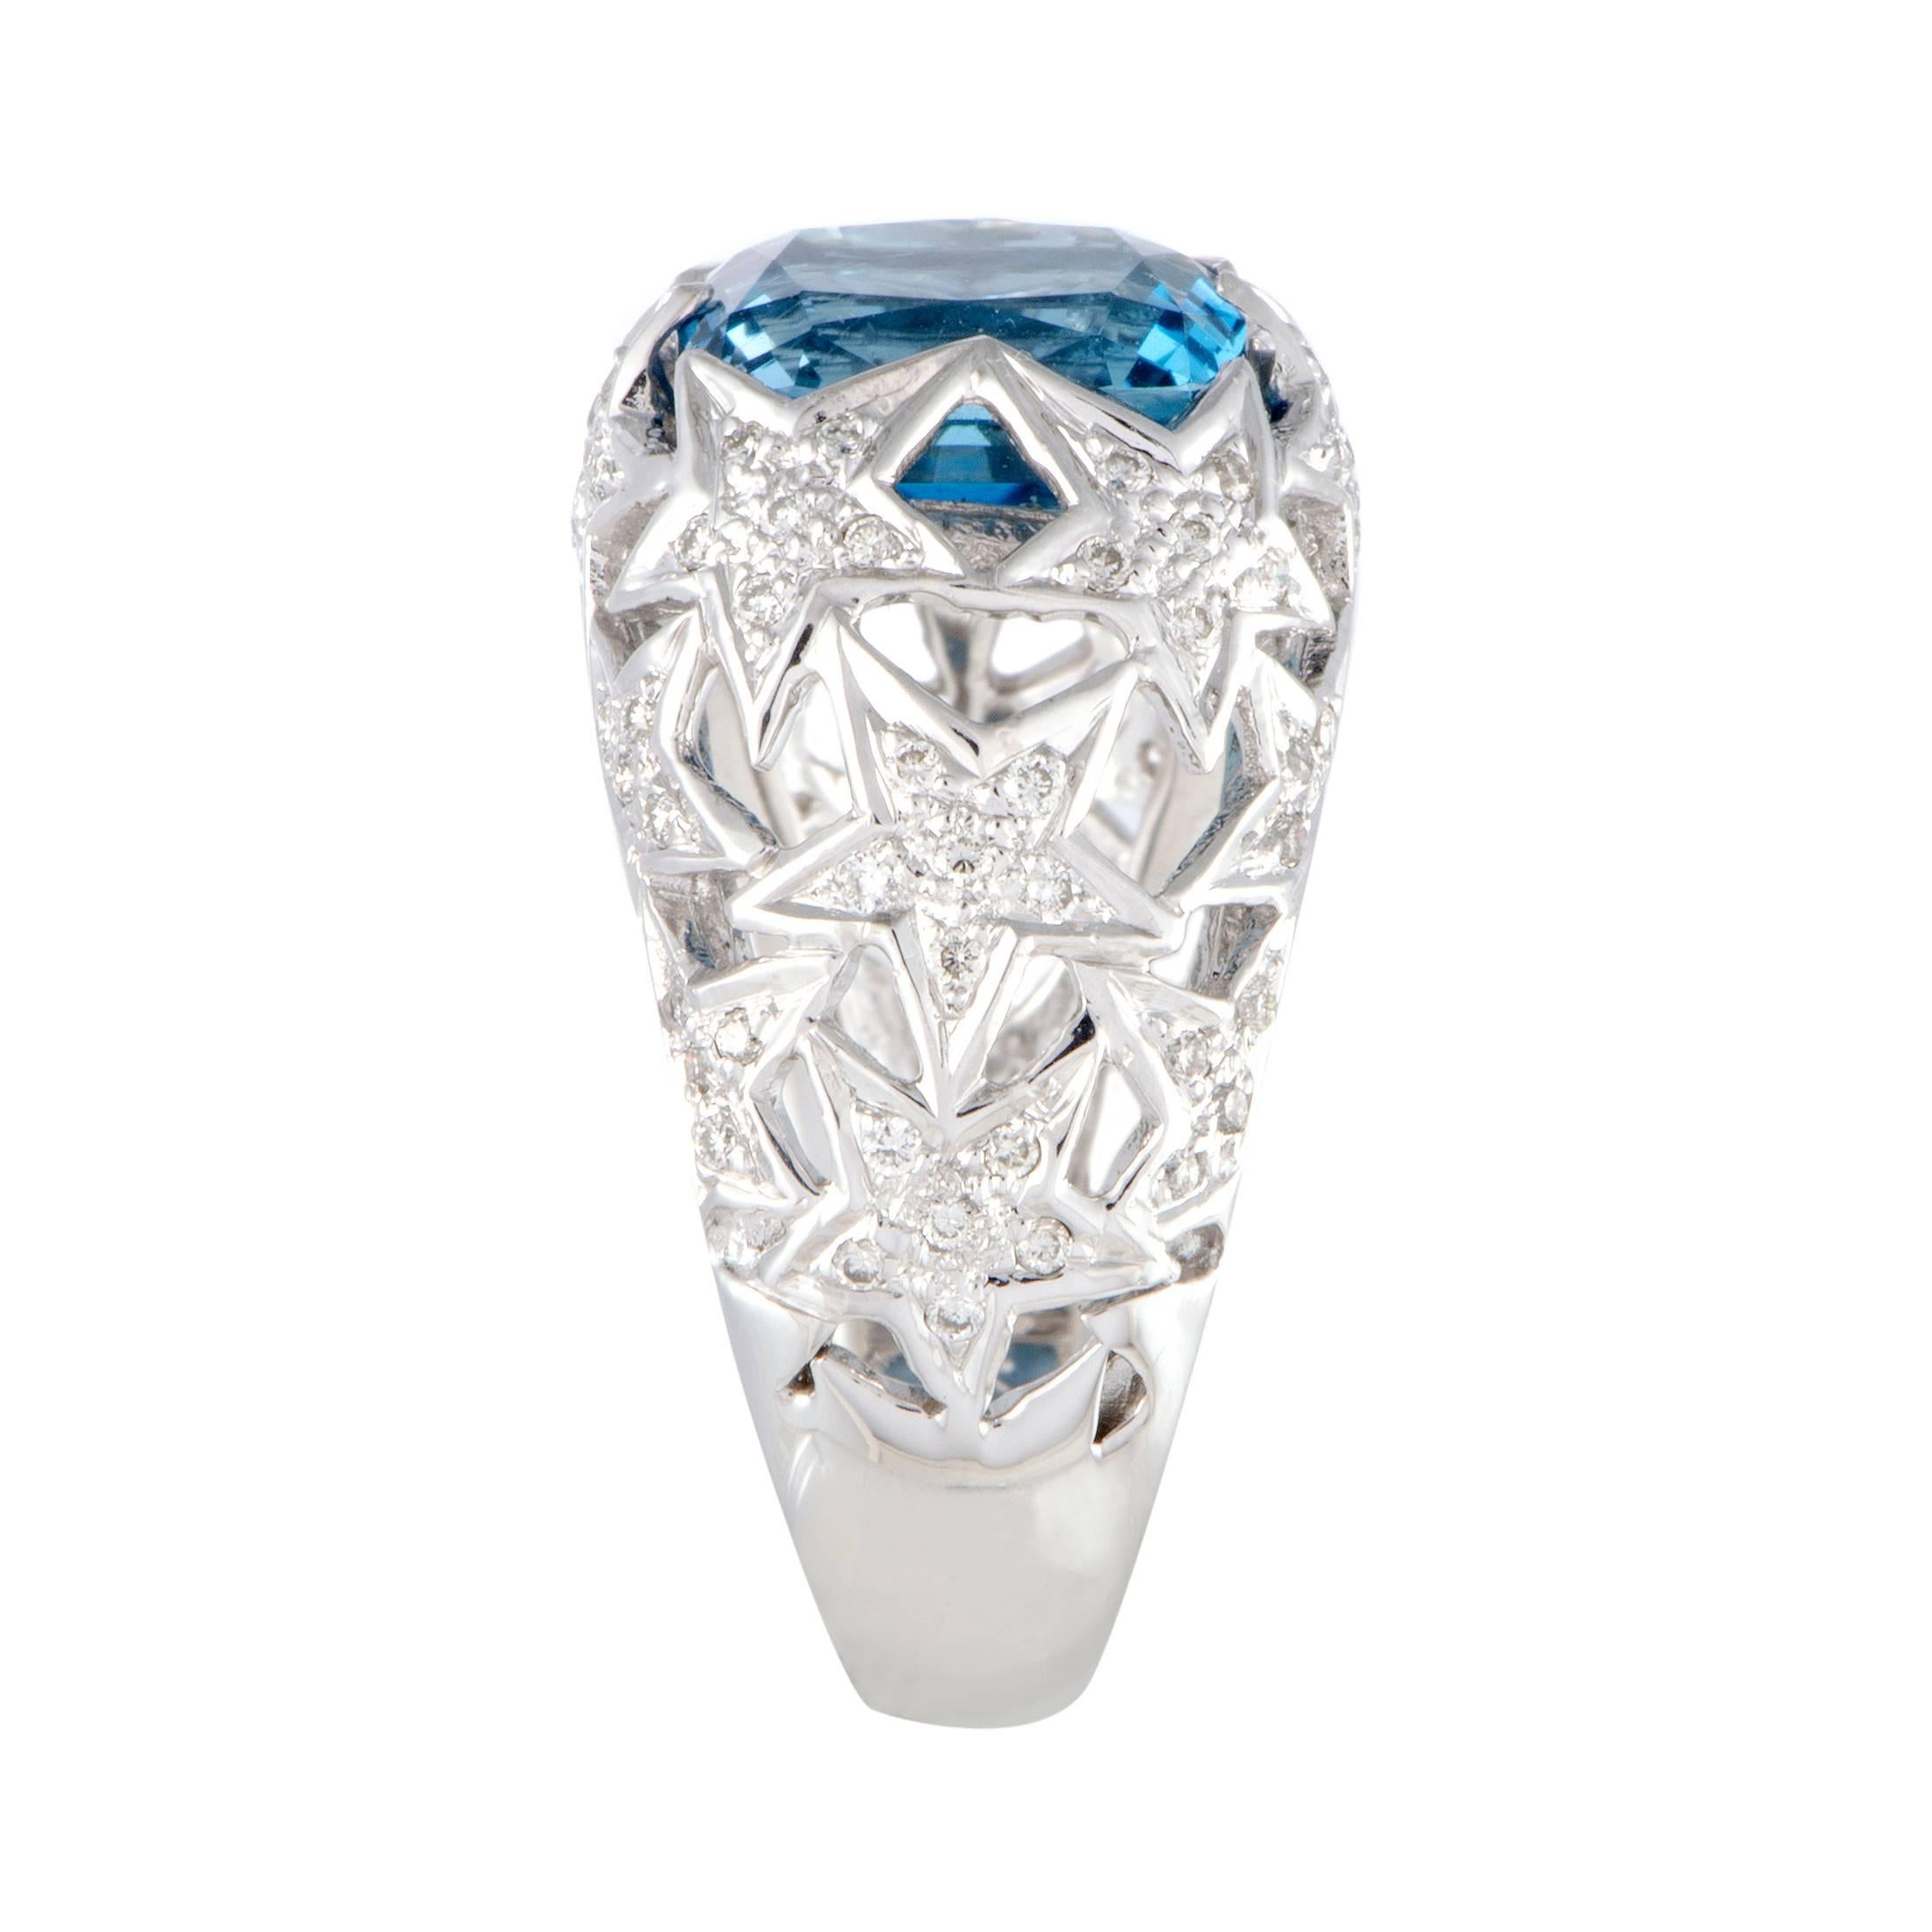 Cushion Cut Diamond and Topaz Star Patterned Bombe Ring